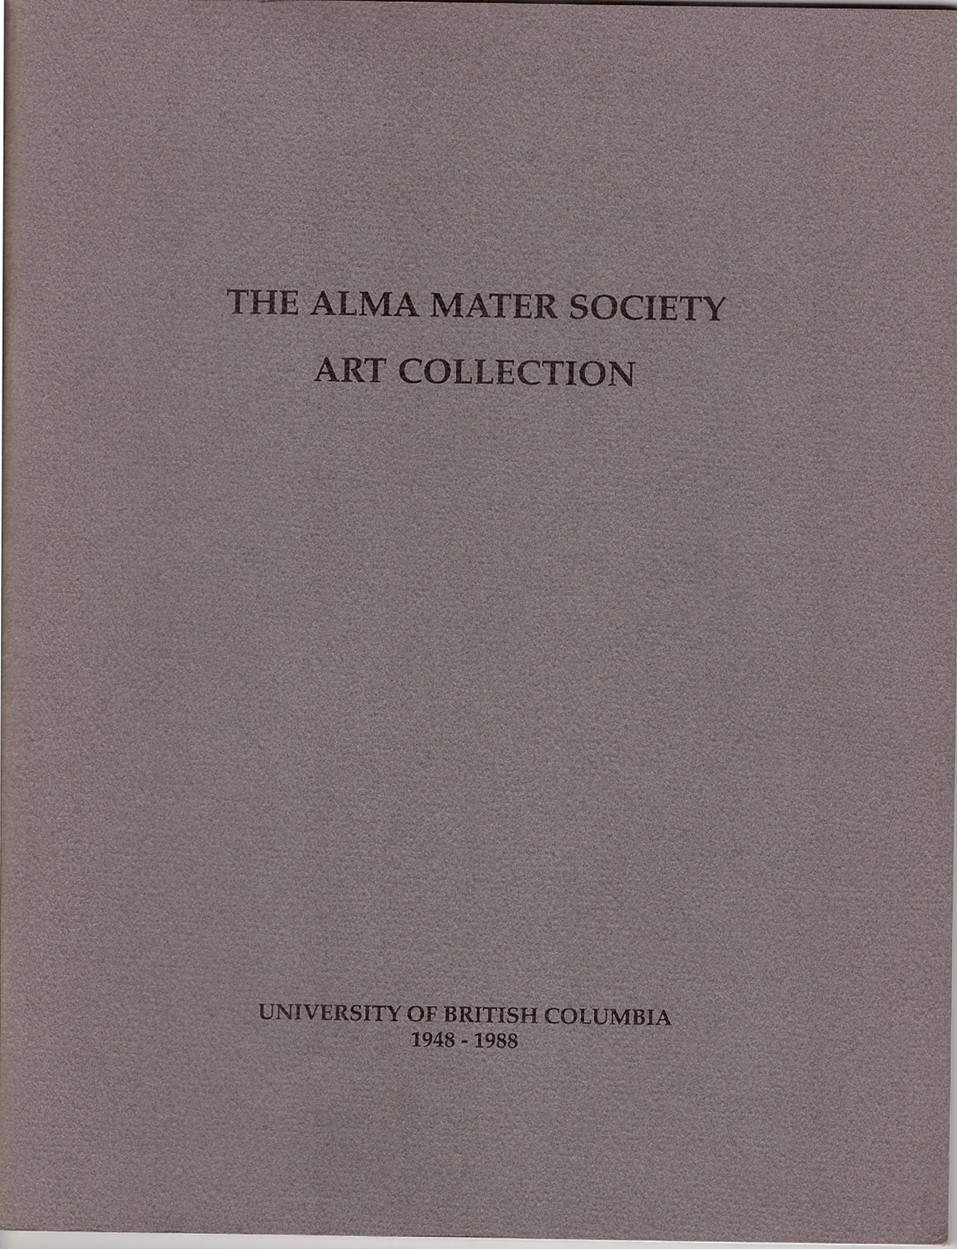 THE ALMA MATTER SOCIETY ART COLLECTION - The Alma Mater Society Art Collection